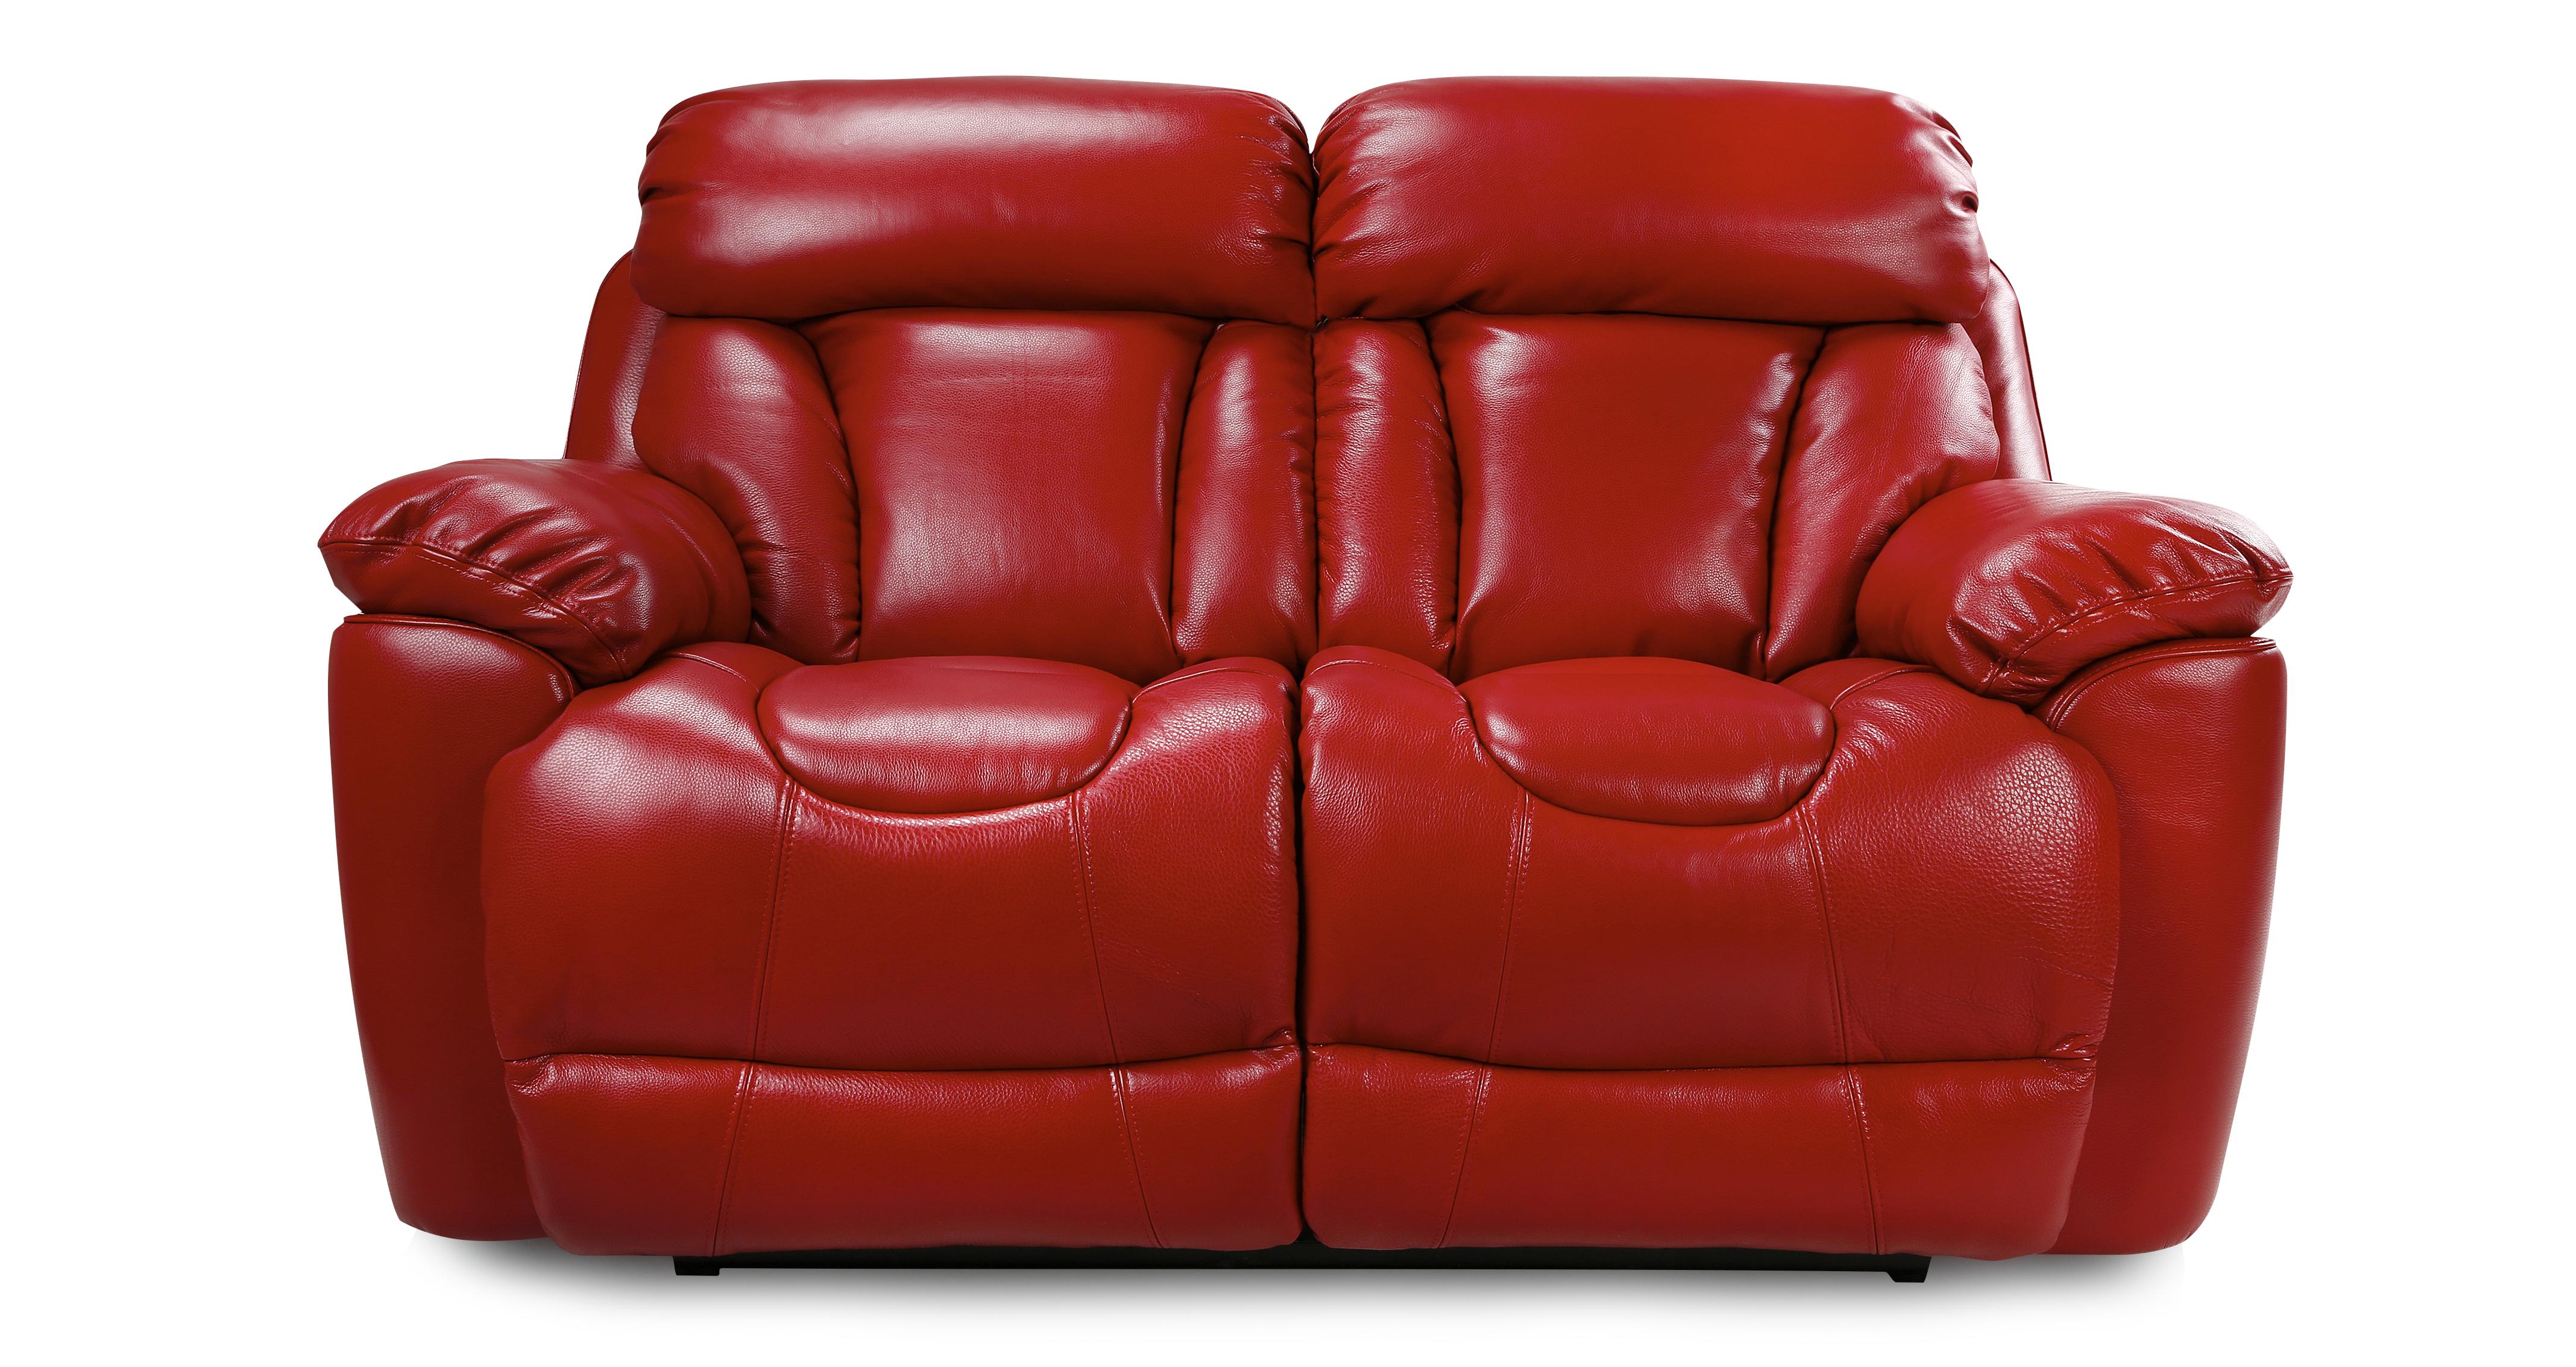 Red Two Seater Chair For Living Room